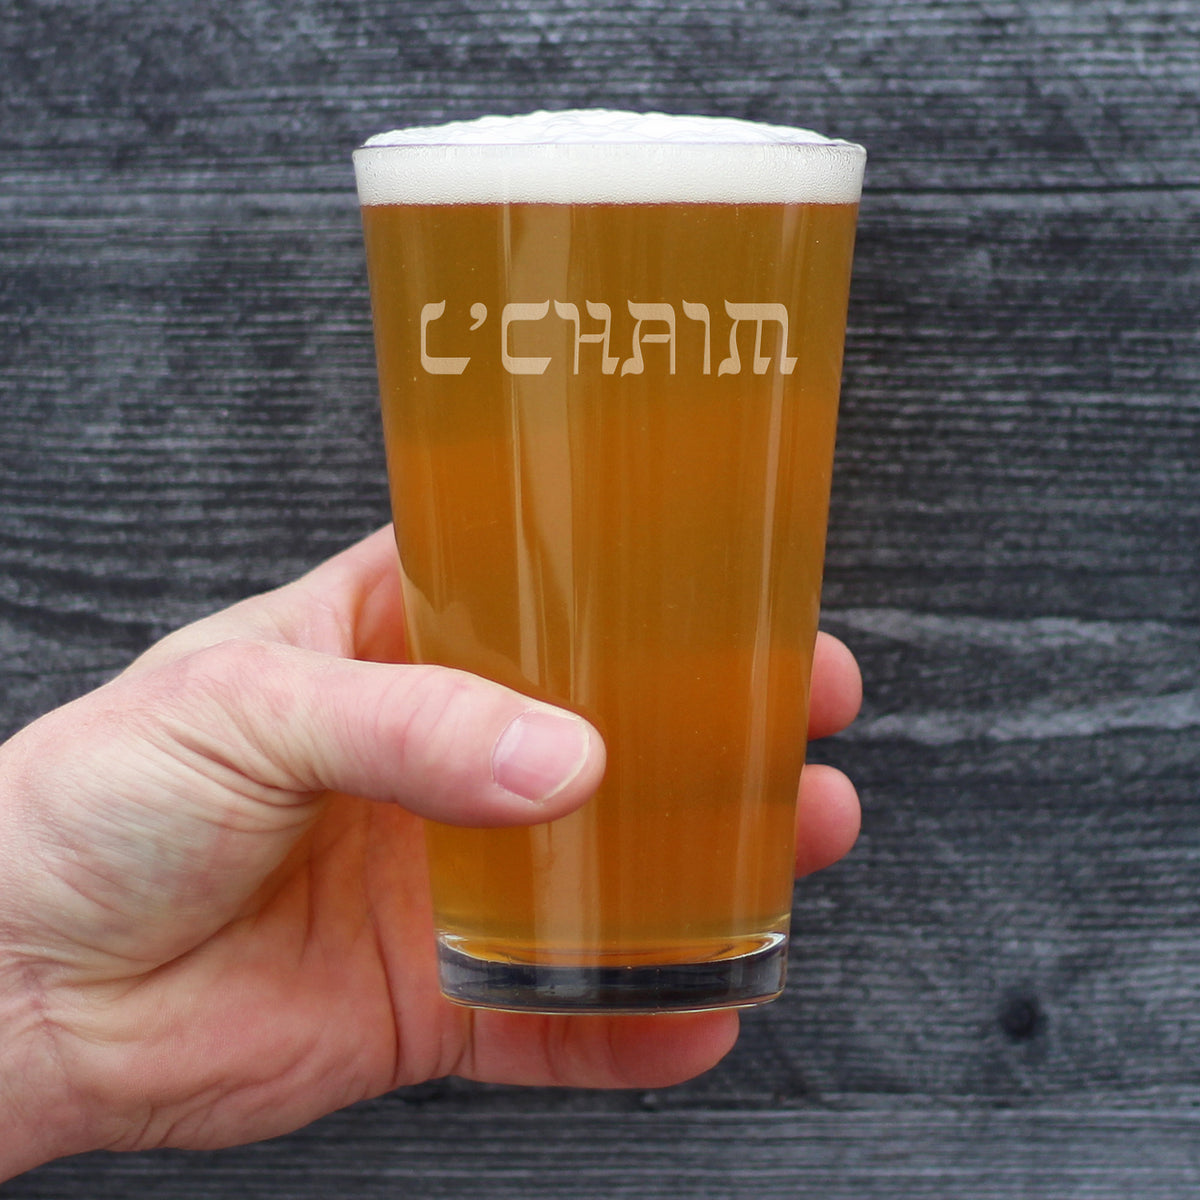 L&#39;Chaim - Hebrew Cheers Pint Glass for Beer - Fun Jewish Gifts or Party Decor for Women &amp; Men - 16 Oz Glasses